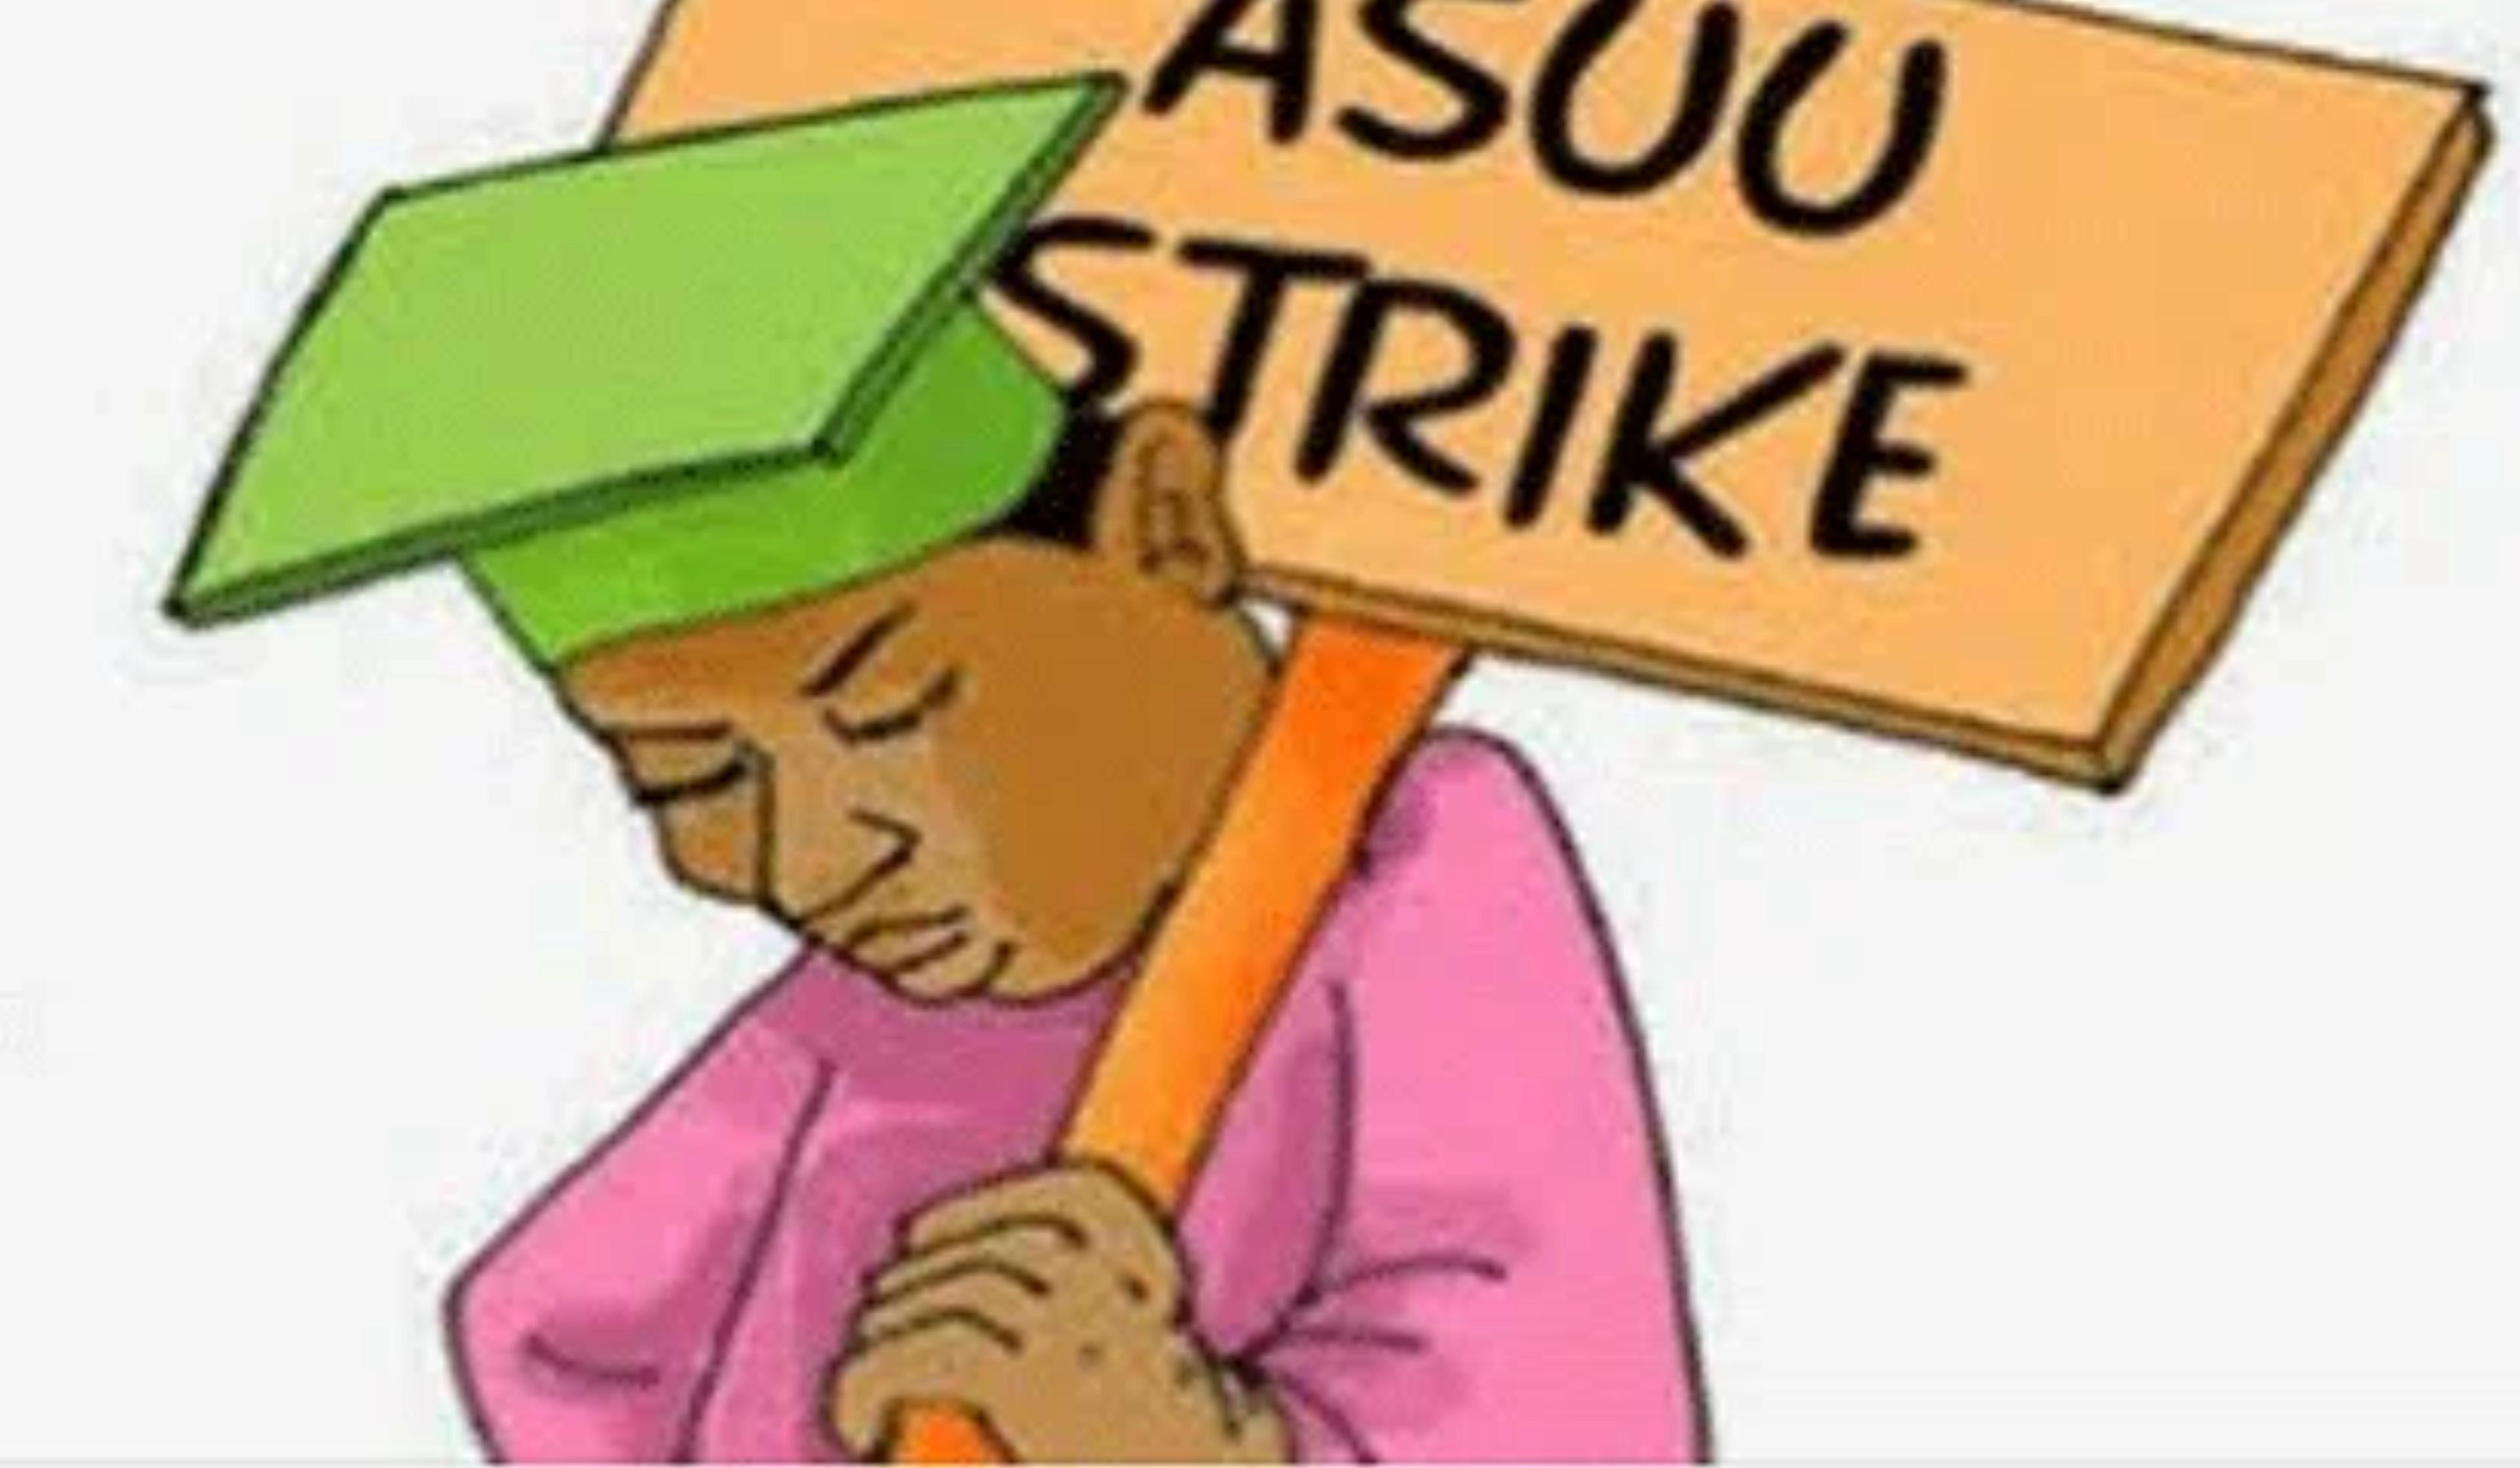 Cover Image for FG breaks ASUU’s rank, plans to release withheld salaries of medical lecturers